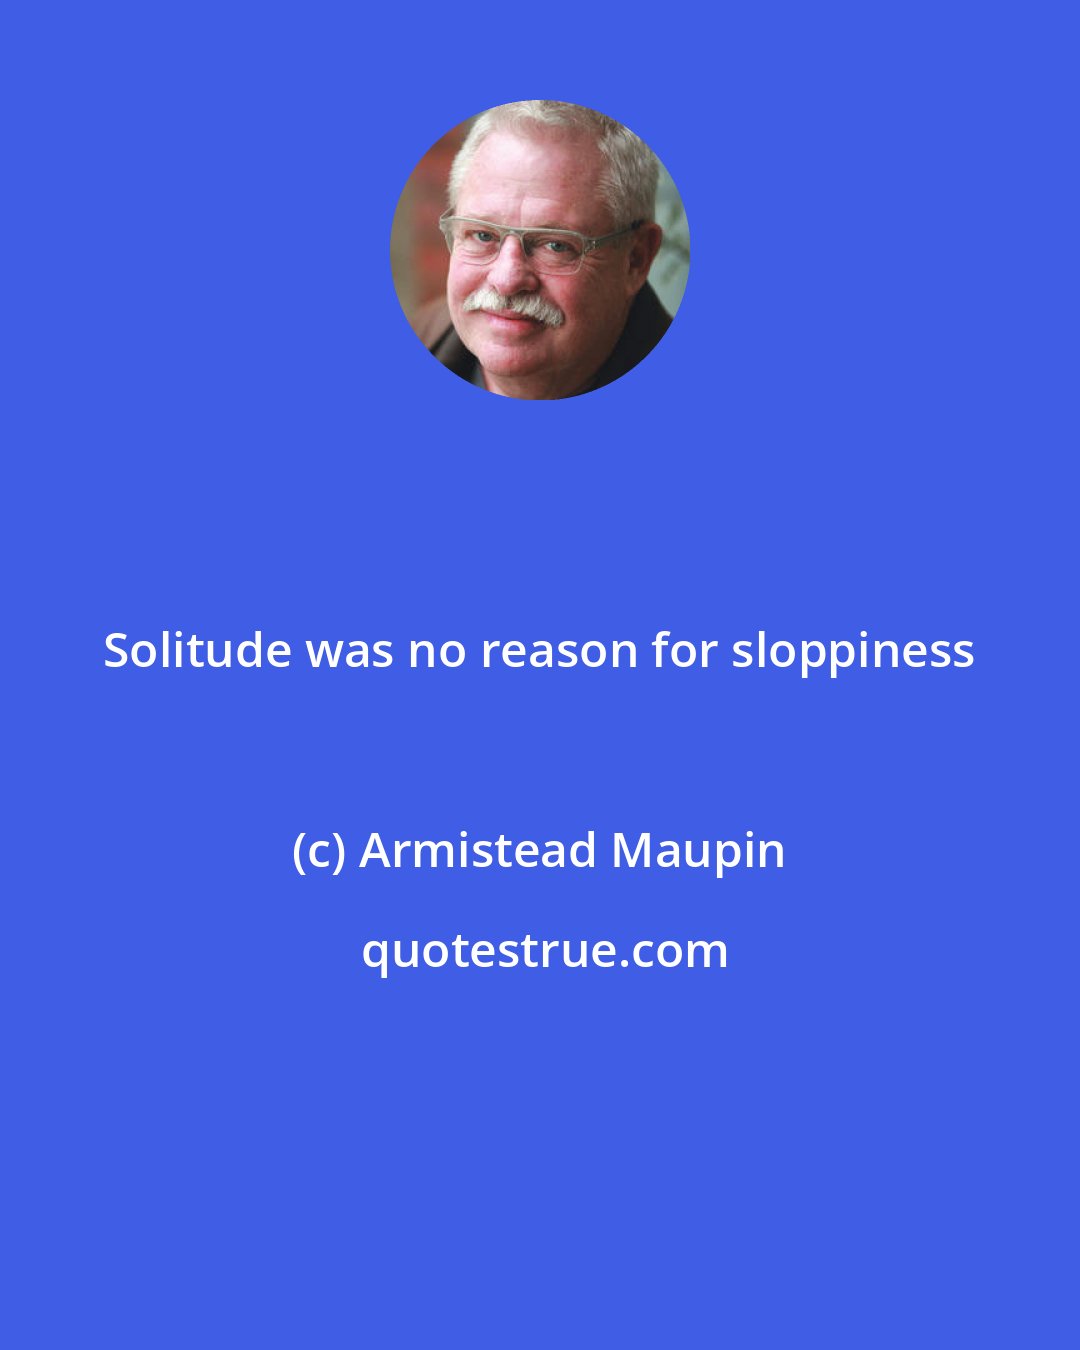 Armistead Maupin: Solitude was no reason for sloppiness